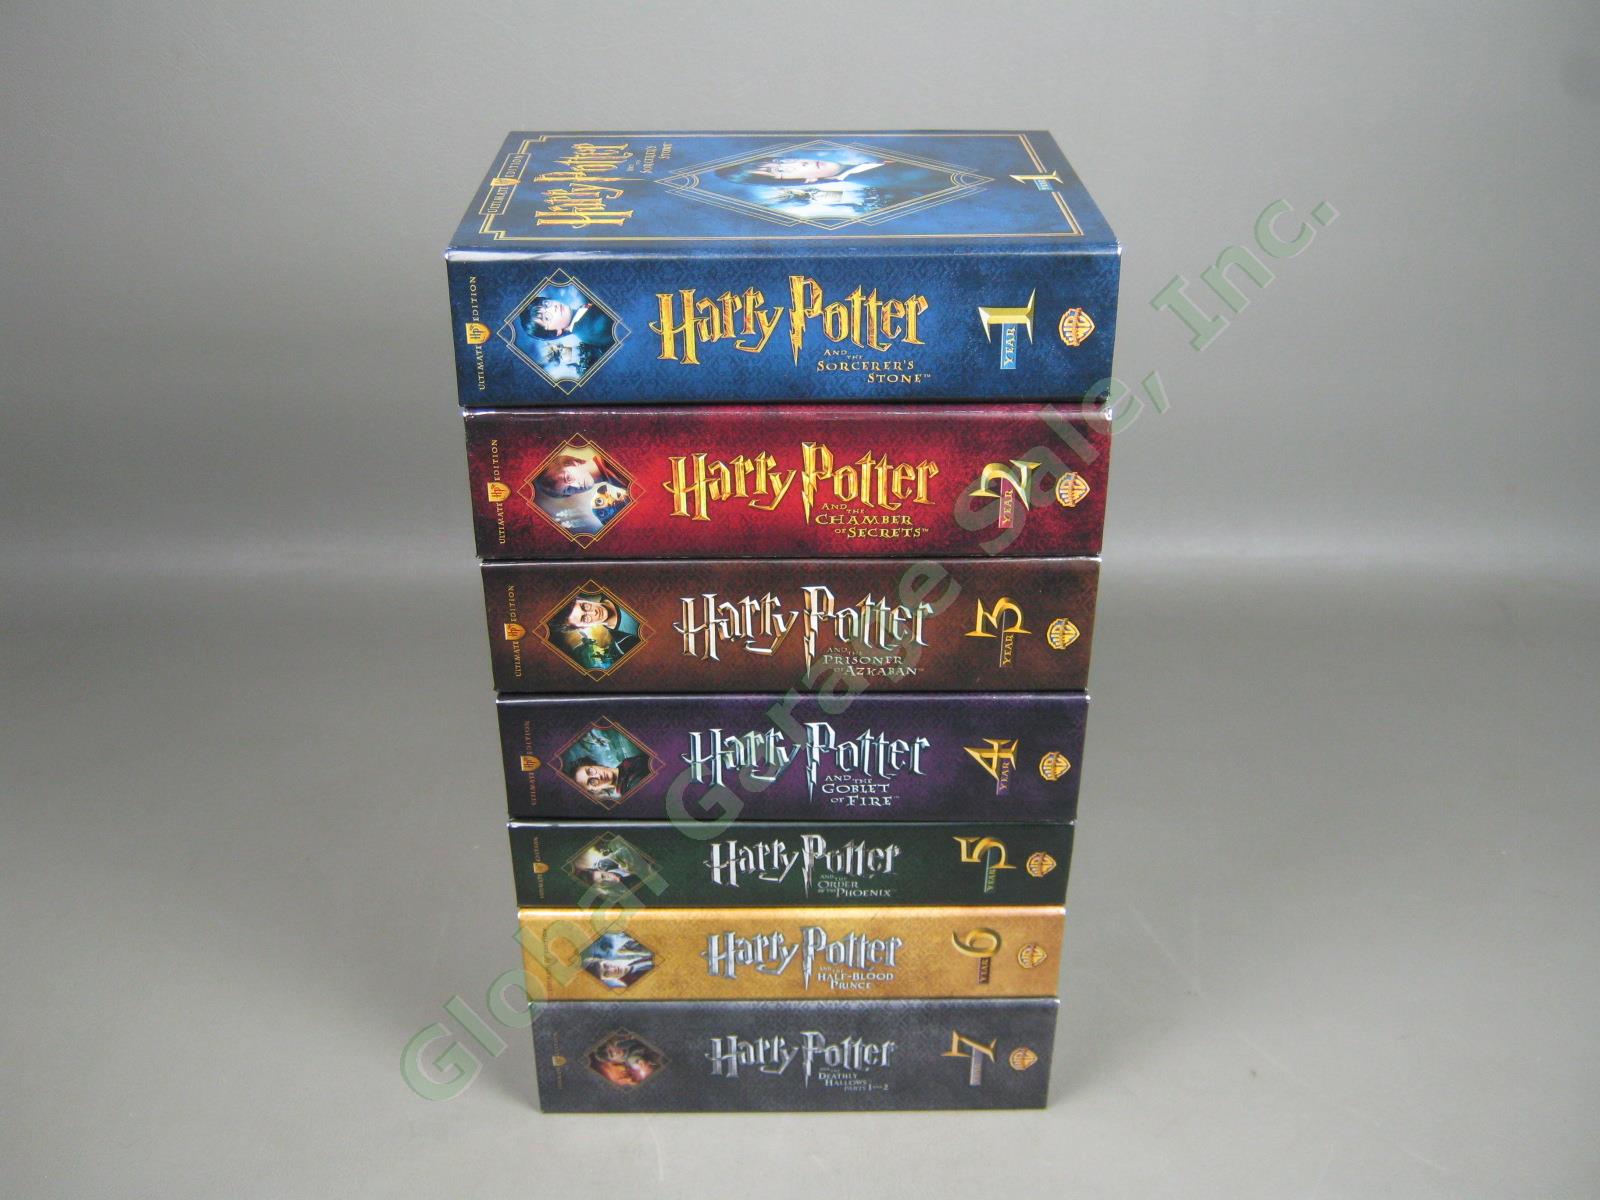 Complete Set Of 7 Harry Potter Ultimate Edition Blu-Ray Movies W/ Boxes Booklets